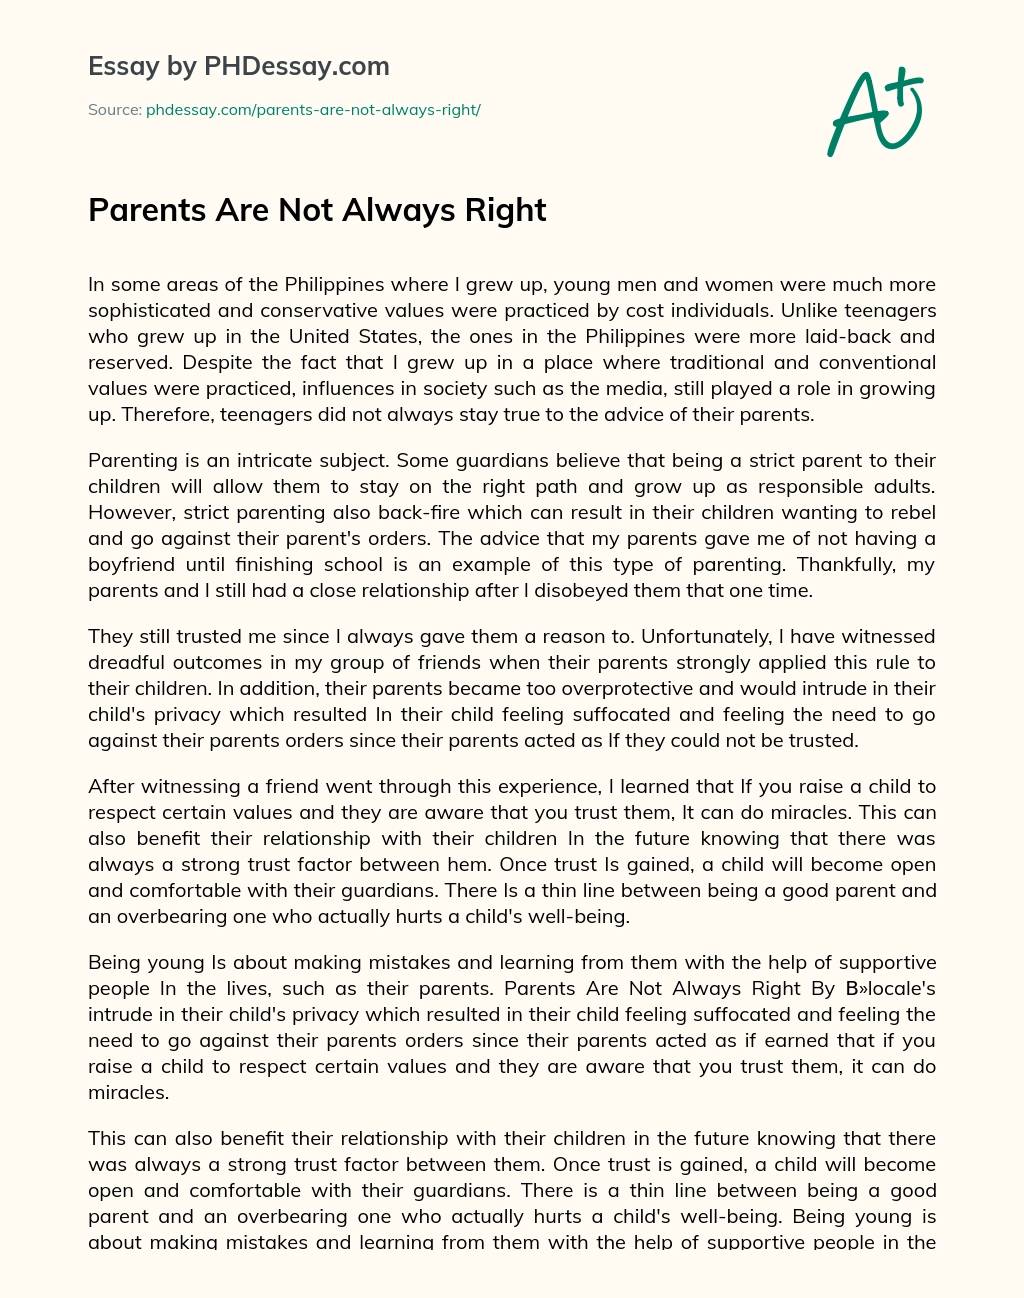 Parents Are Not Always Right essay